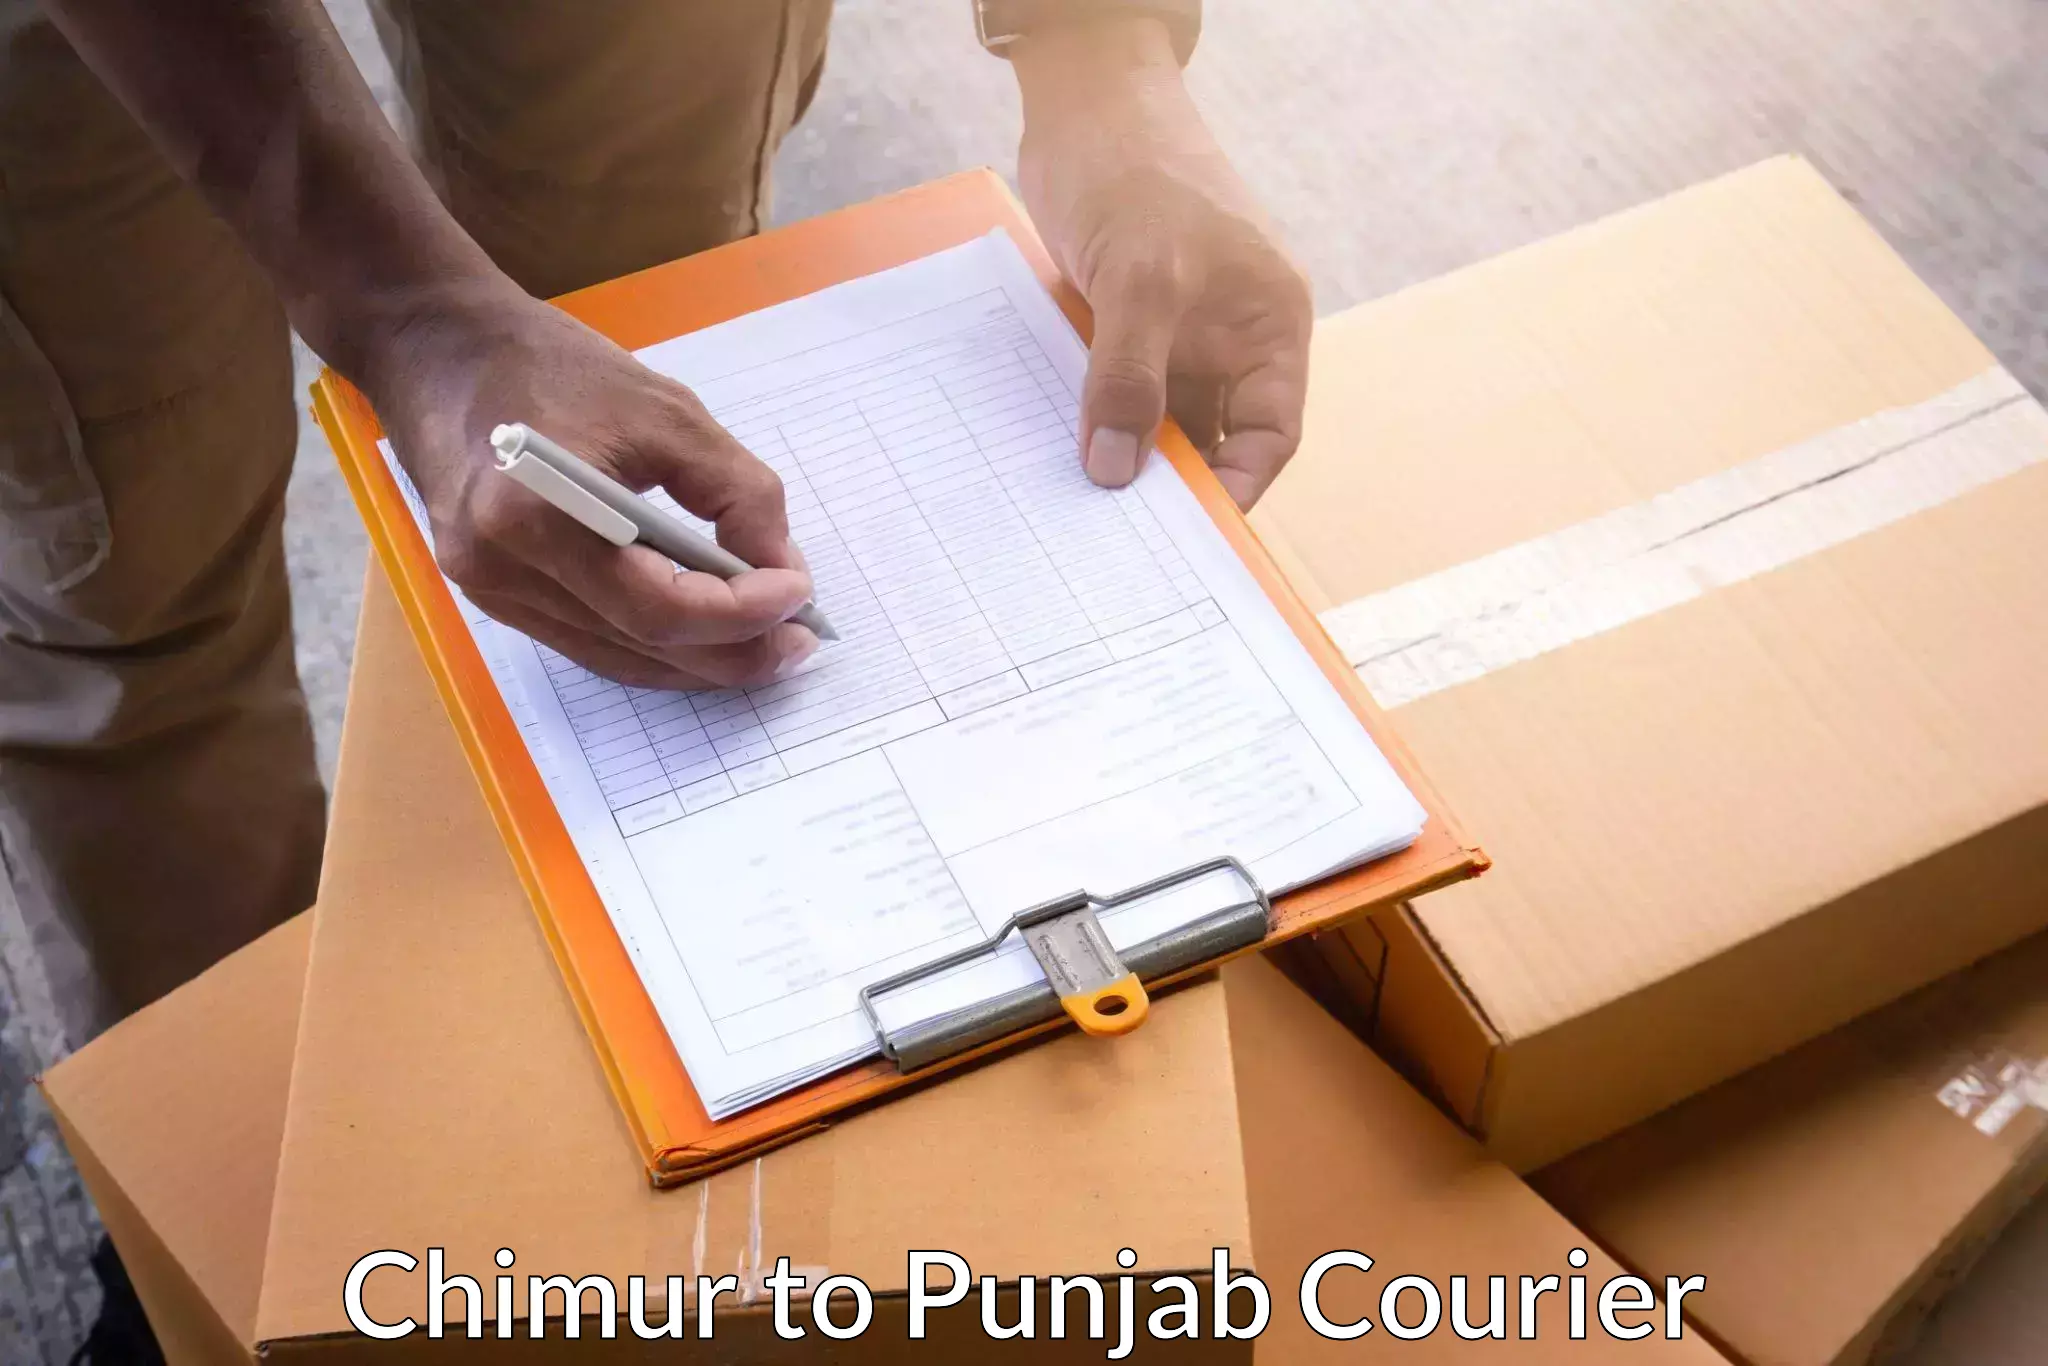 Pharmaceutical courier Chimur to Punjab